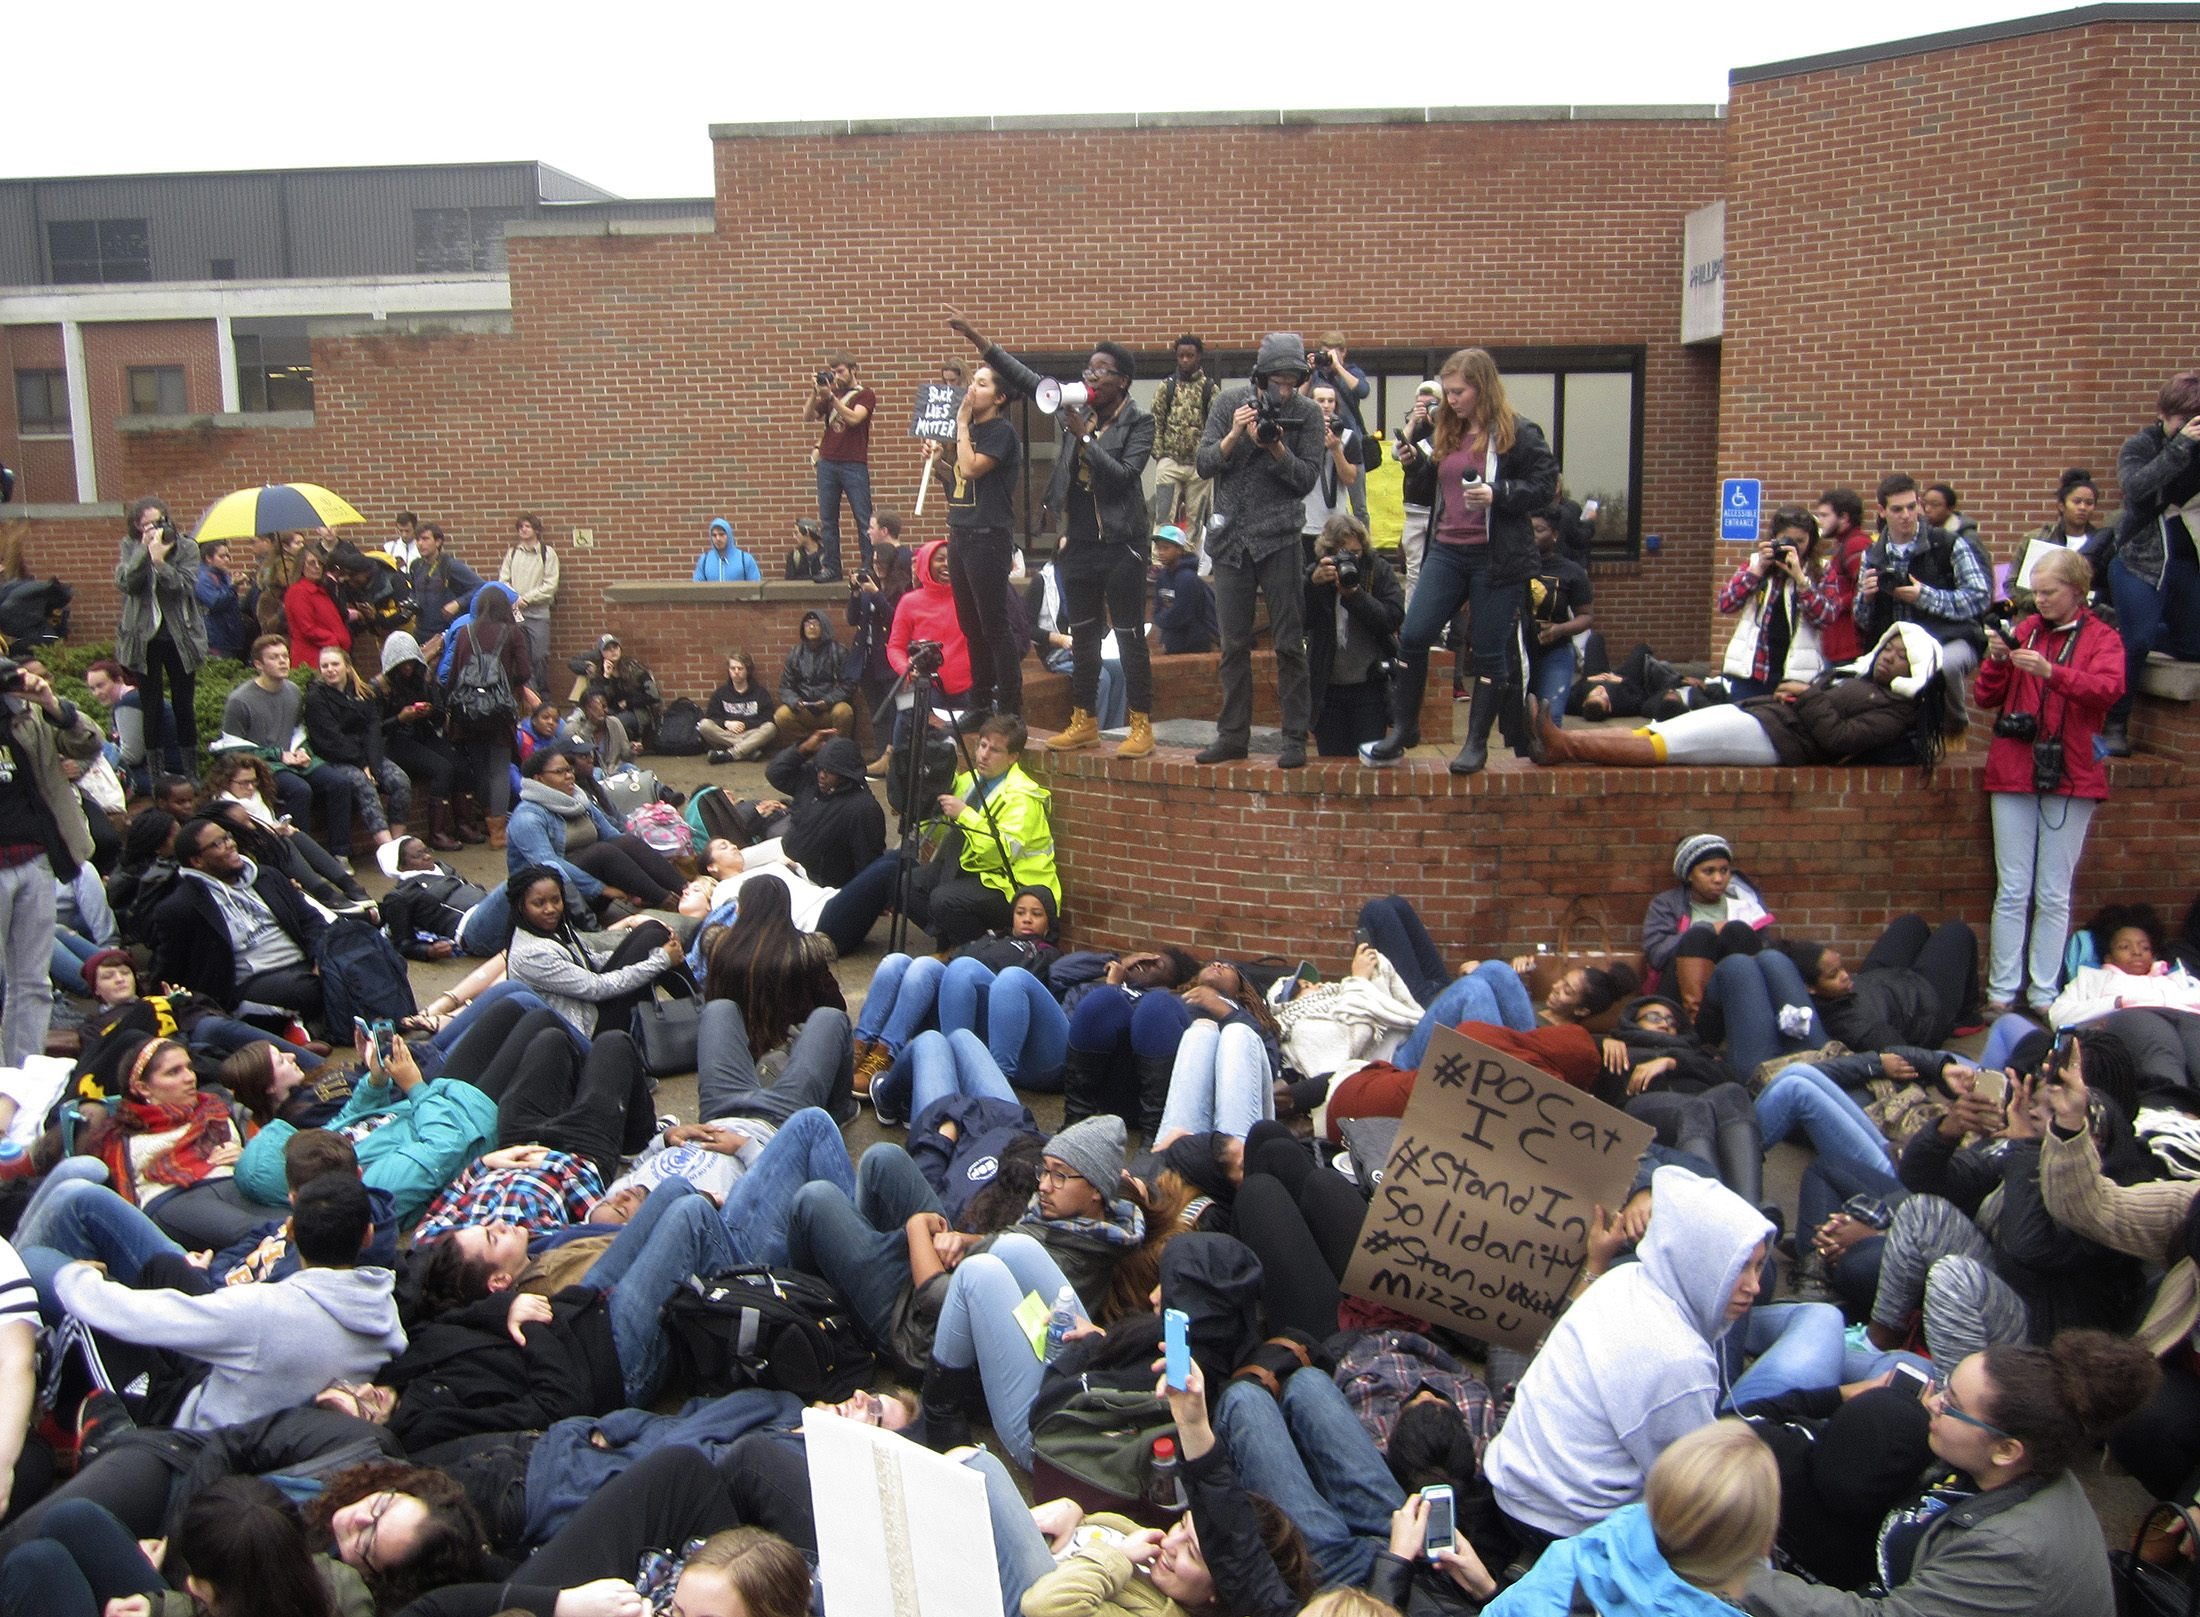 Protestorsr encourage students to lay down as part of a 'die-in' this afternoon at Ithaca College in Ithaca, New York on Nov. 11, 2015.